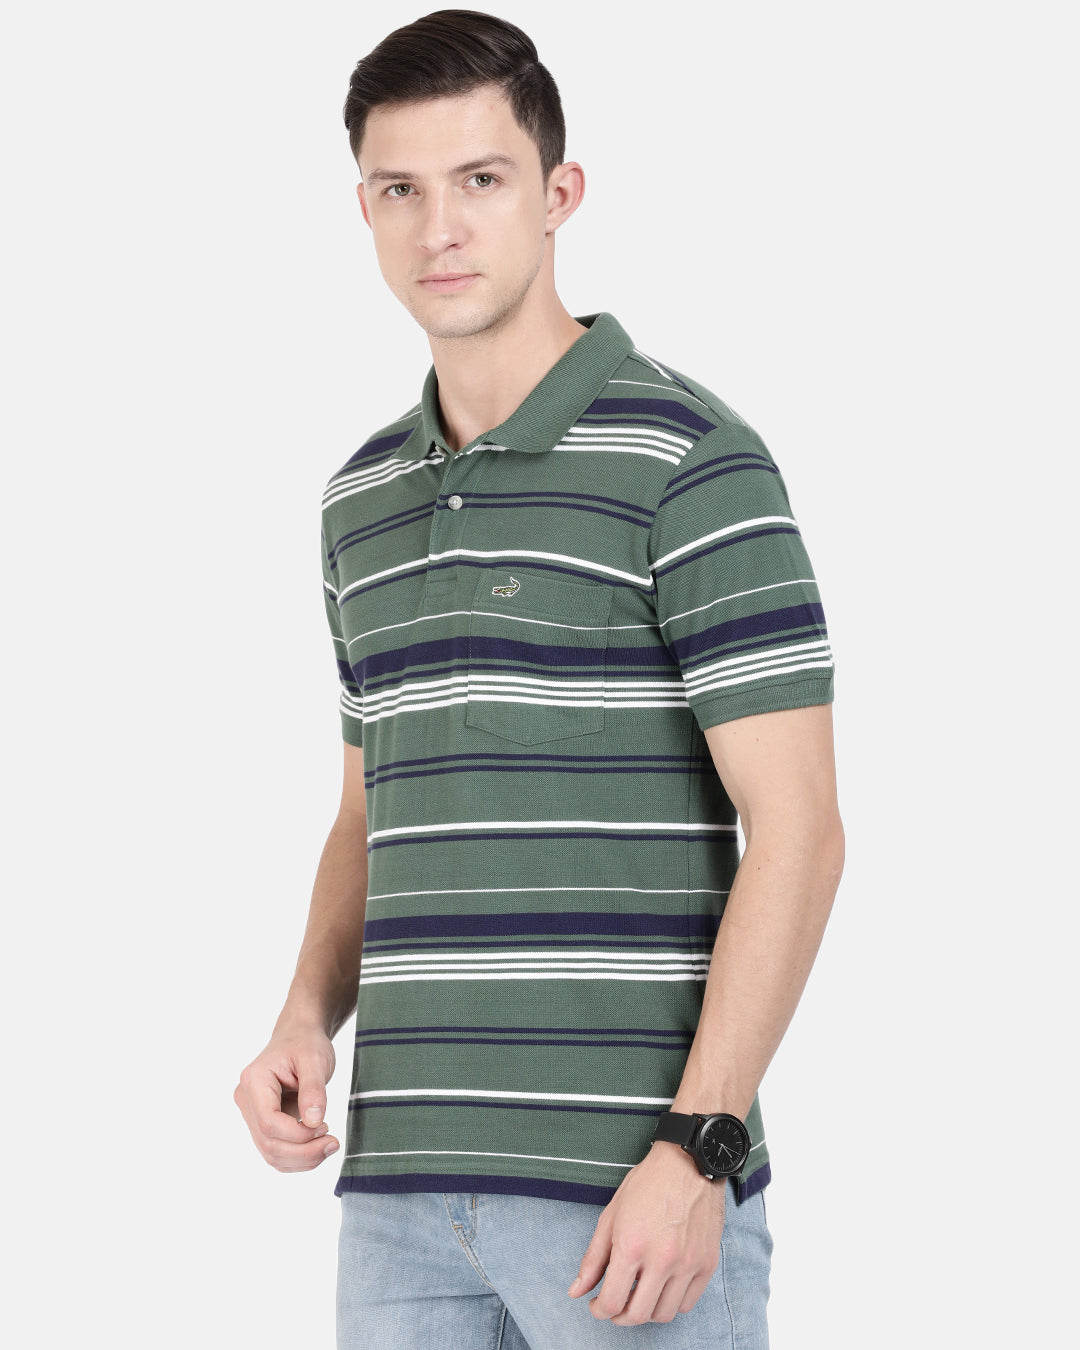 Crocodile Men's Striped Slim Fit Polo T-shirt with Patch Pocket